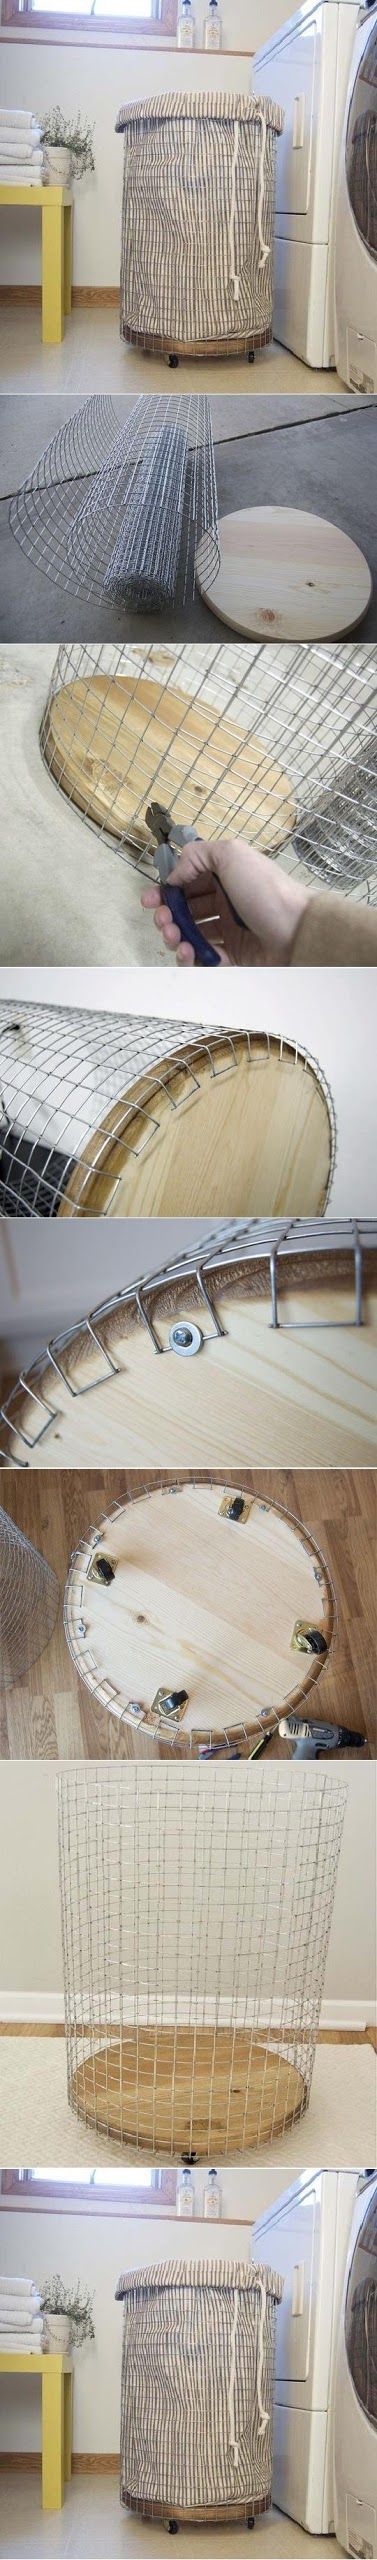 DIY : How To Make a Laundry Basket